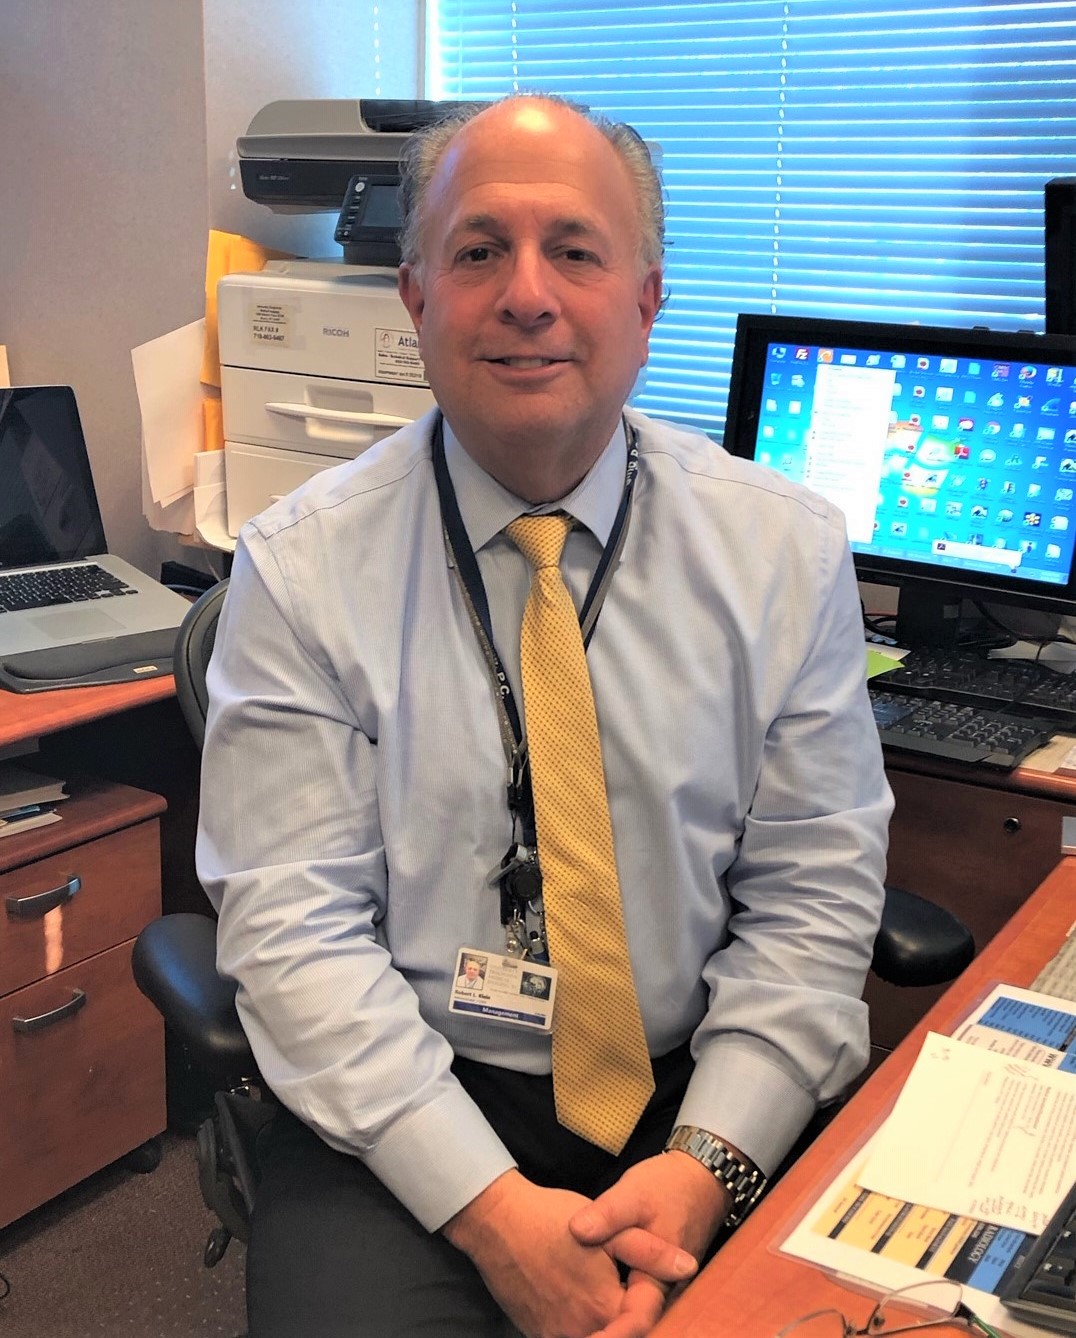 Robert Klein, practice administrator and chief operating officer of Universal Diagnostic Medical Imaging, shares how a CT calcium score exam uncovered a heart condition.